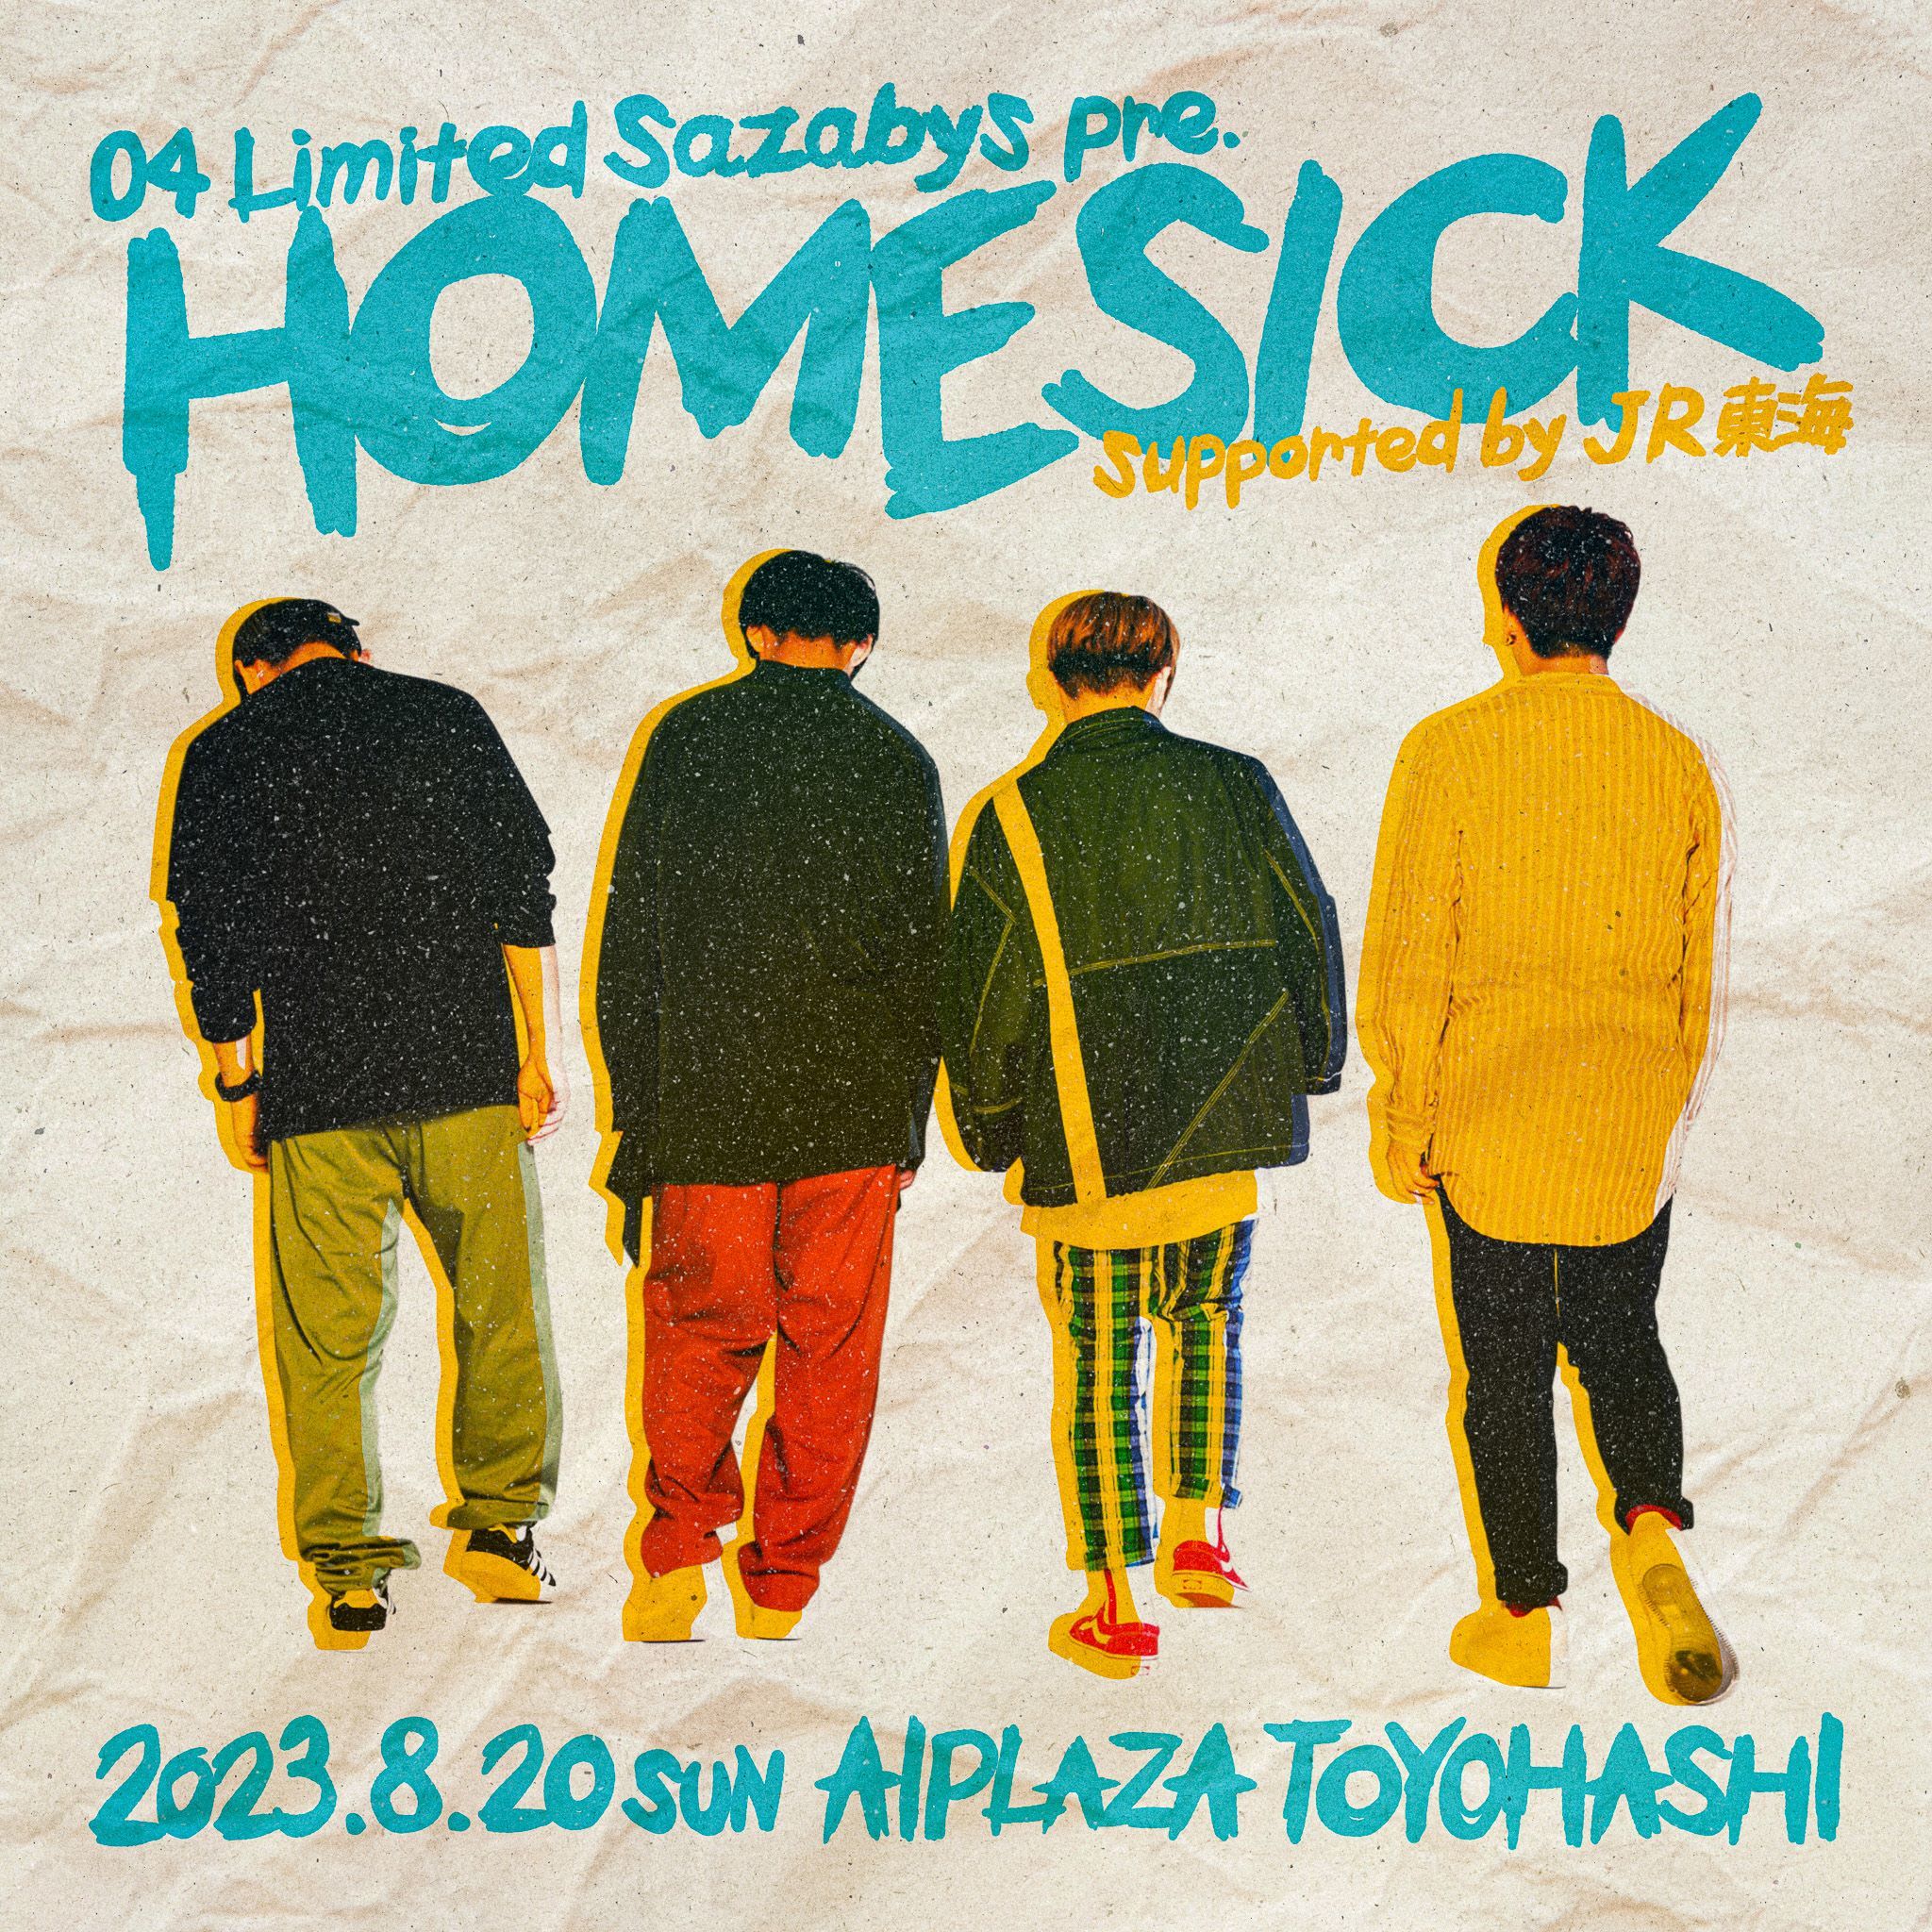 04 Limited Sazabys pre. 「HOMESICK」supported by JR東海